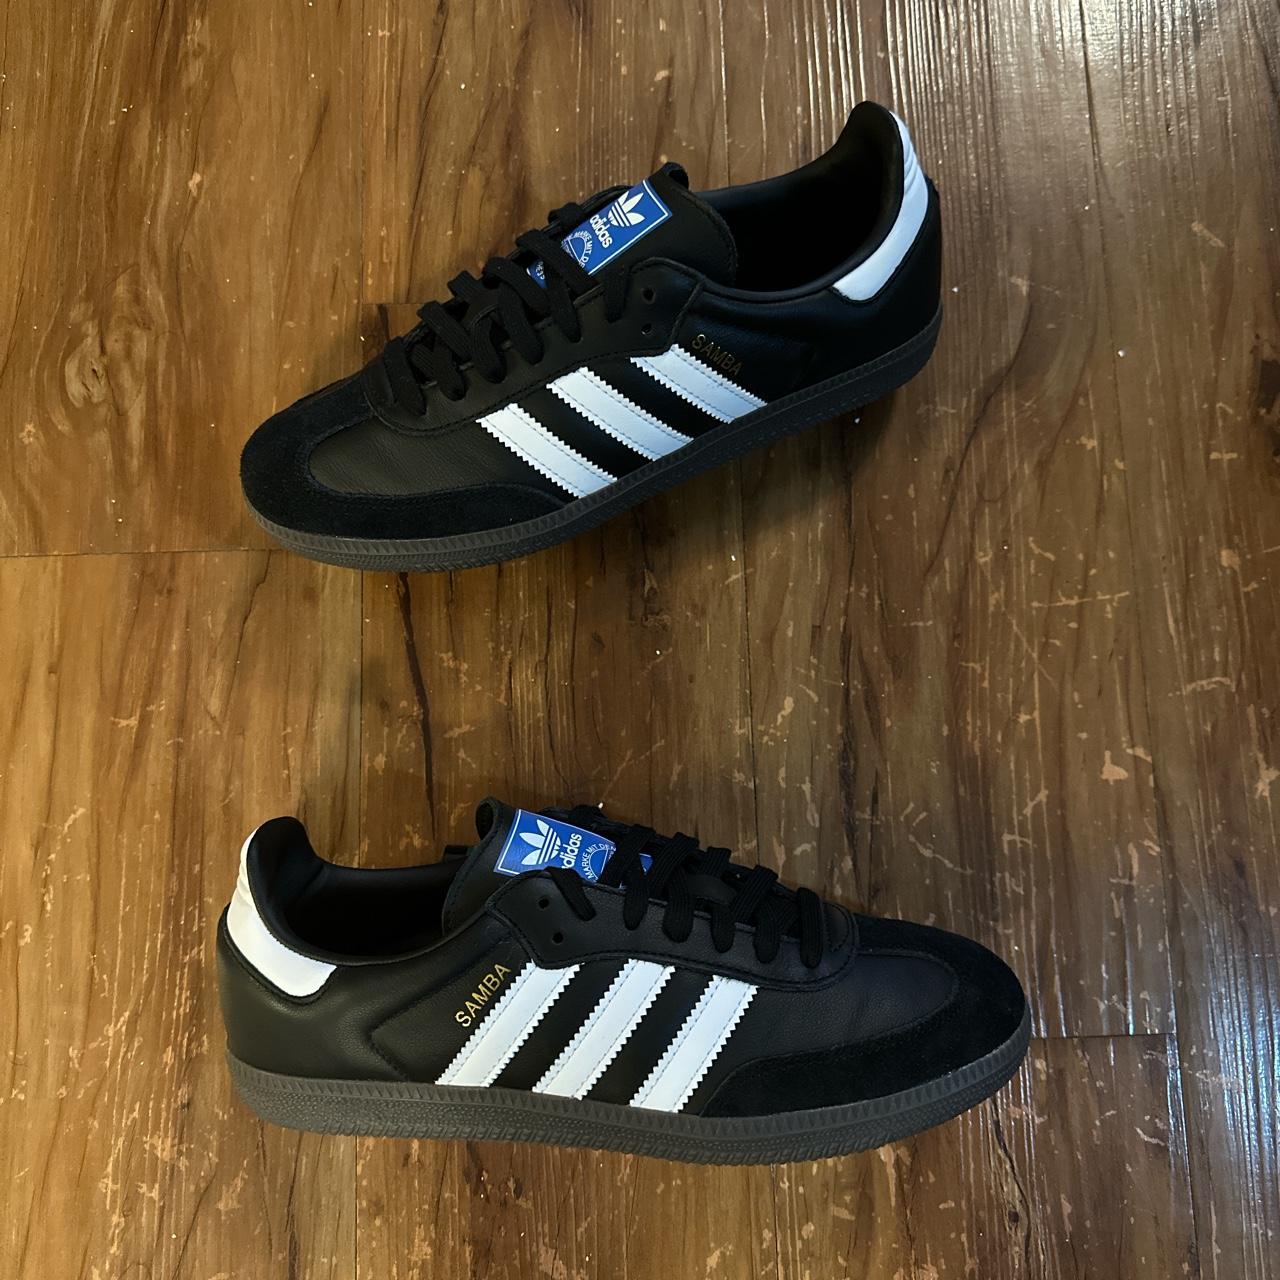 adidas samba og black colorway these are new without... - Depop